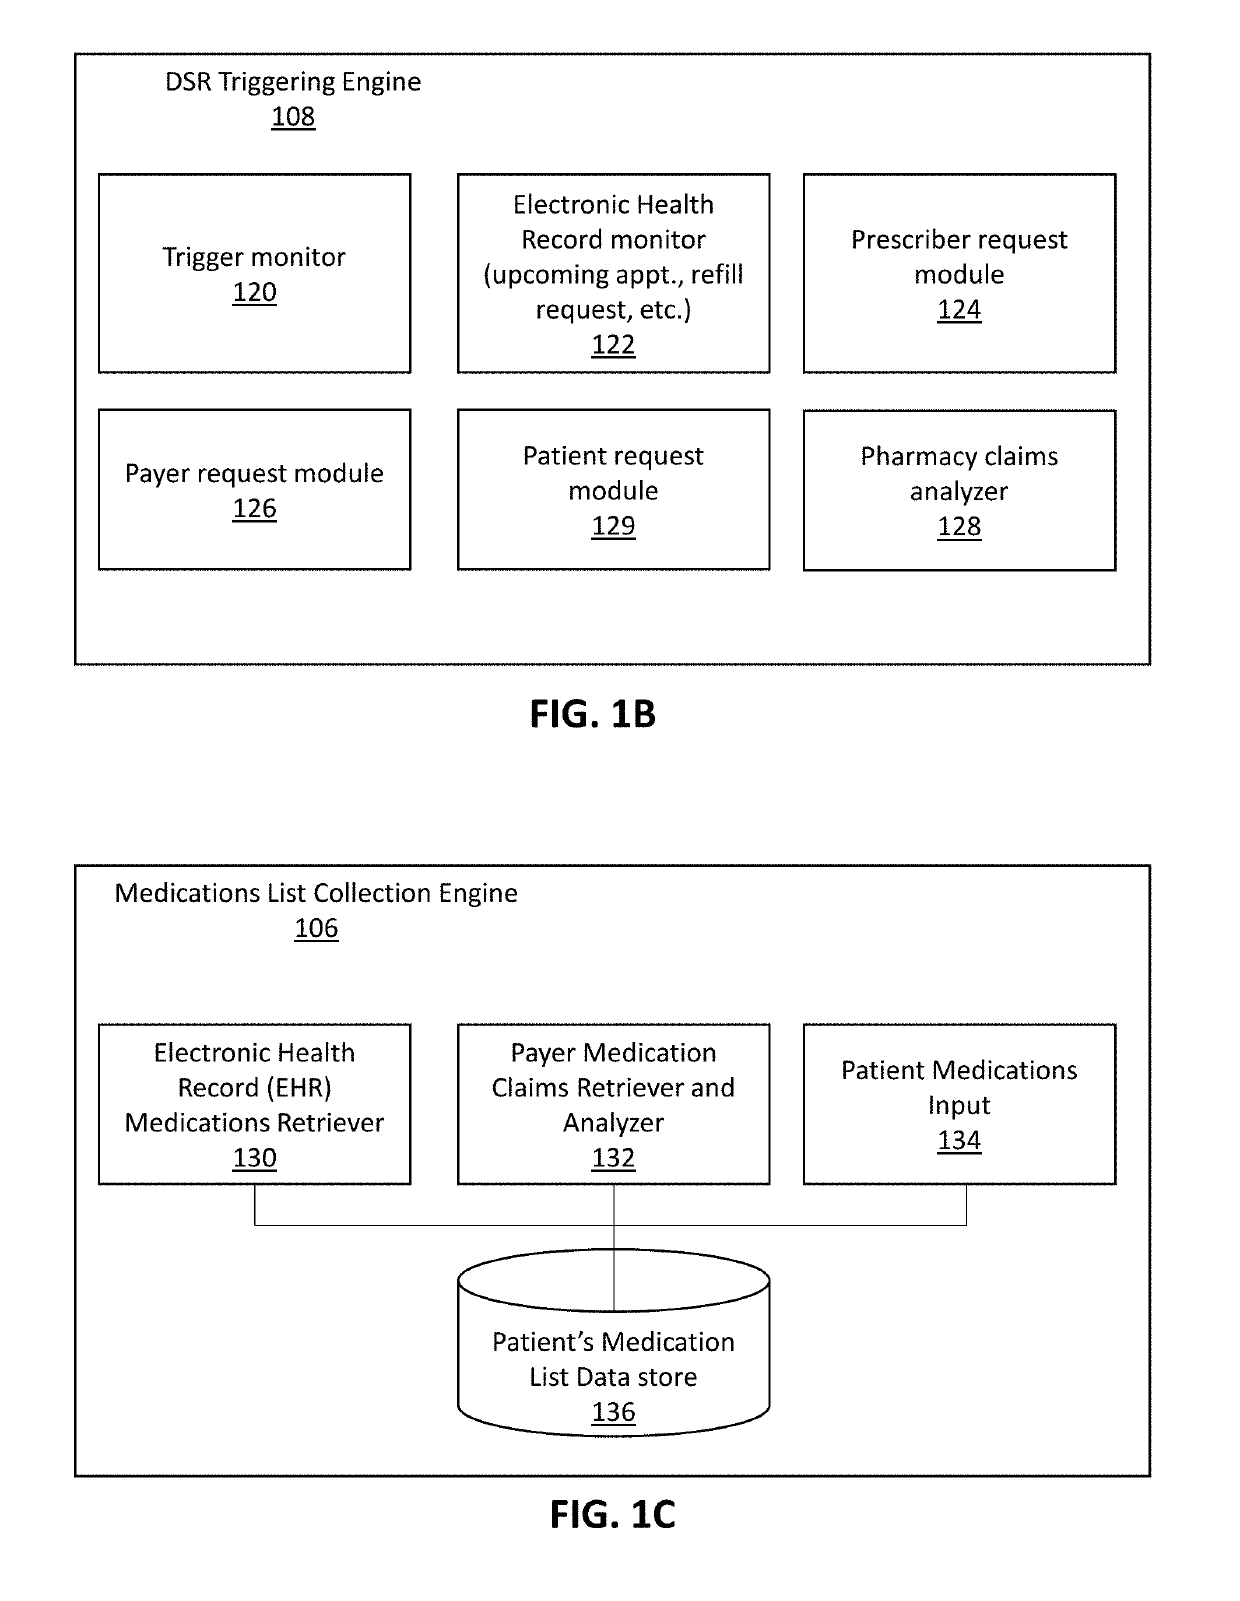 Methods and apparatuses for providing alternatives for preexisting prescribed medications